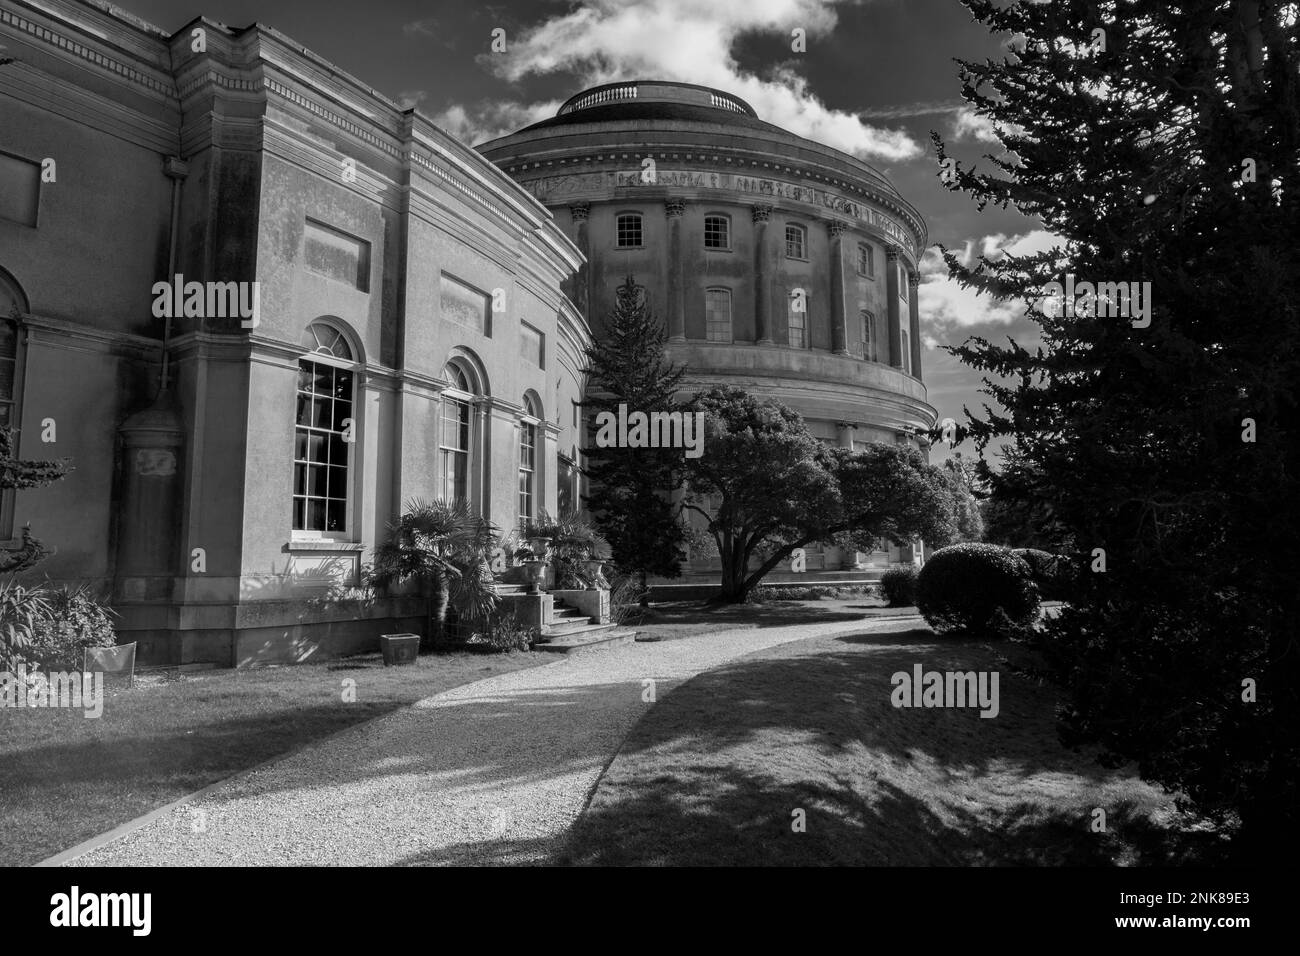 Black and white images of the rotunda at Ickworth house, designed by the architect Antonio Asprucci, Stock Photo